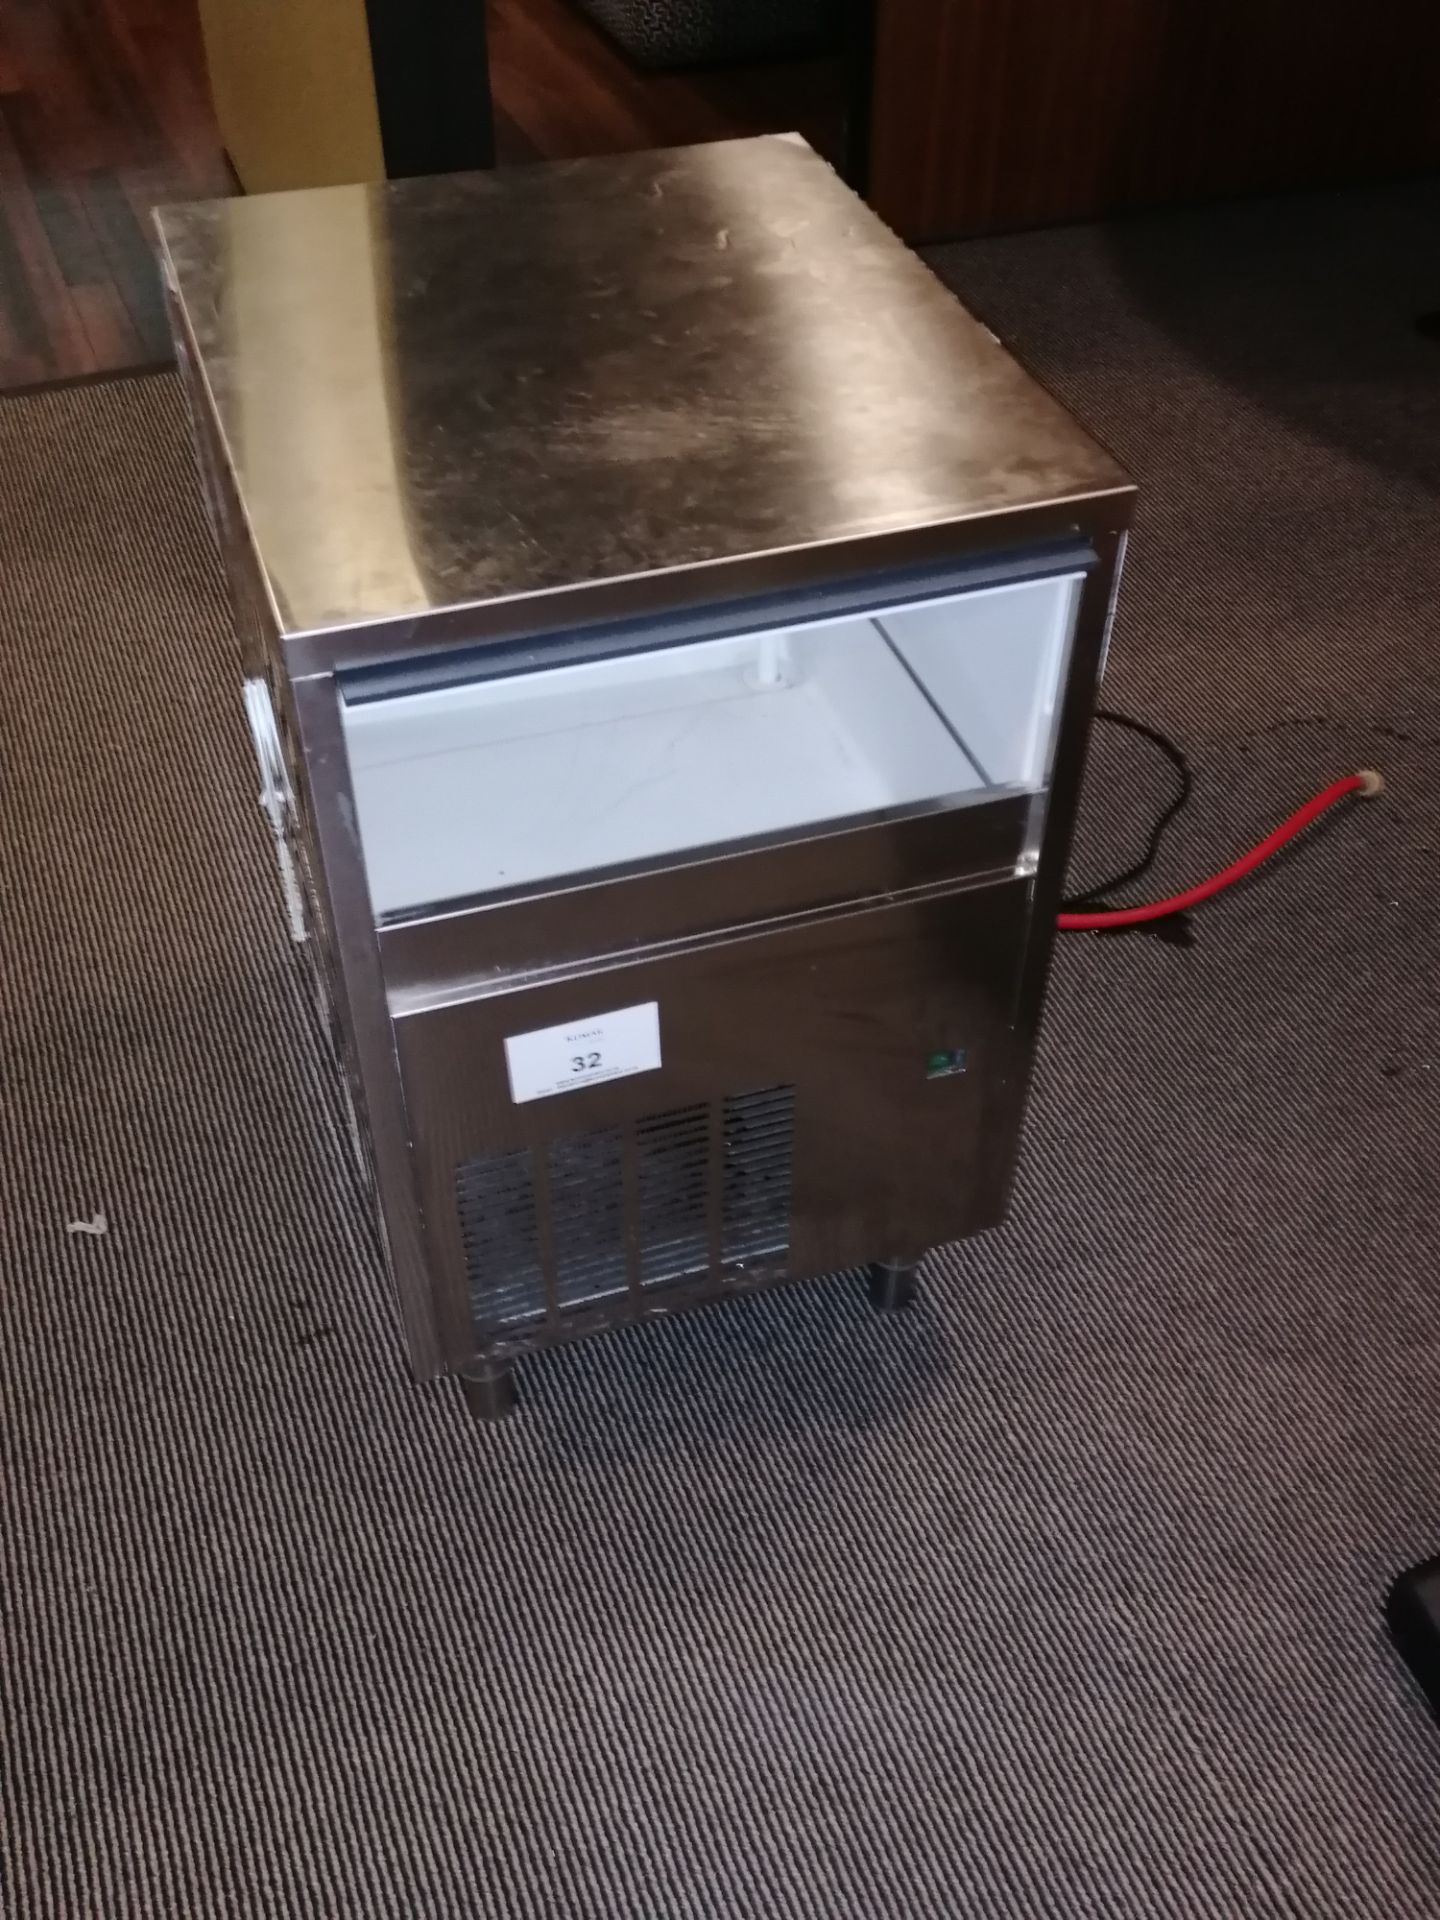 Maidaid Model M42-16 Ice maker, manufactured 2016 - Image 4 of 4